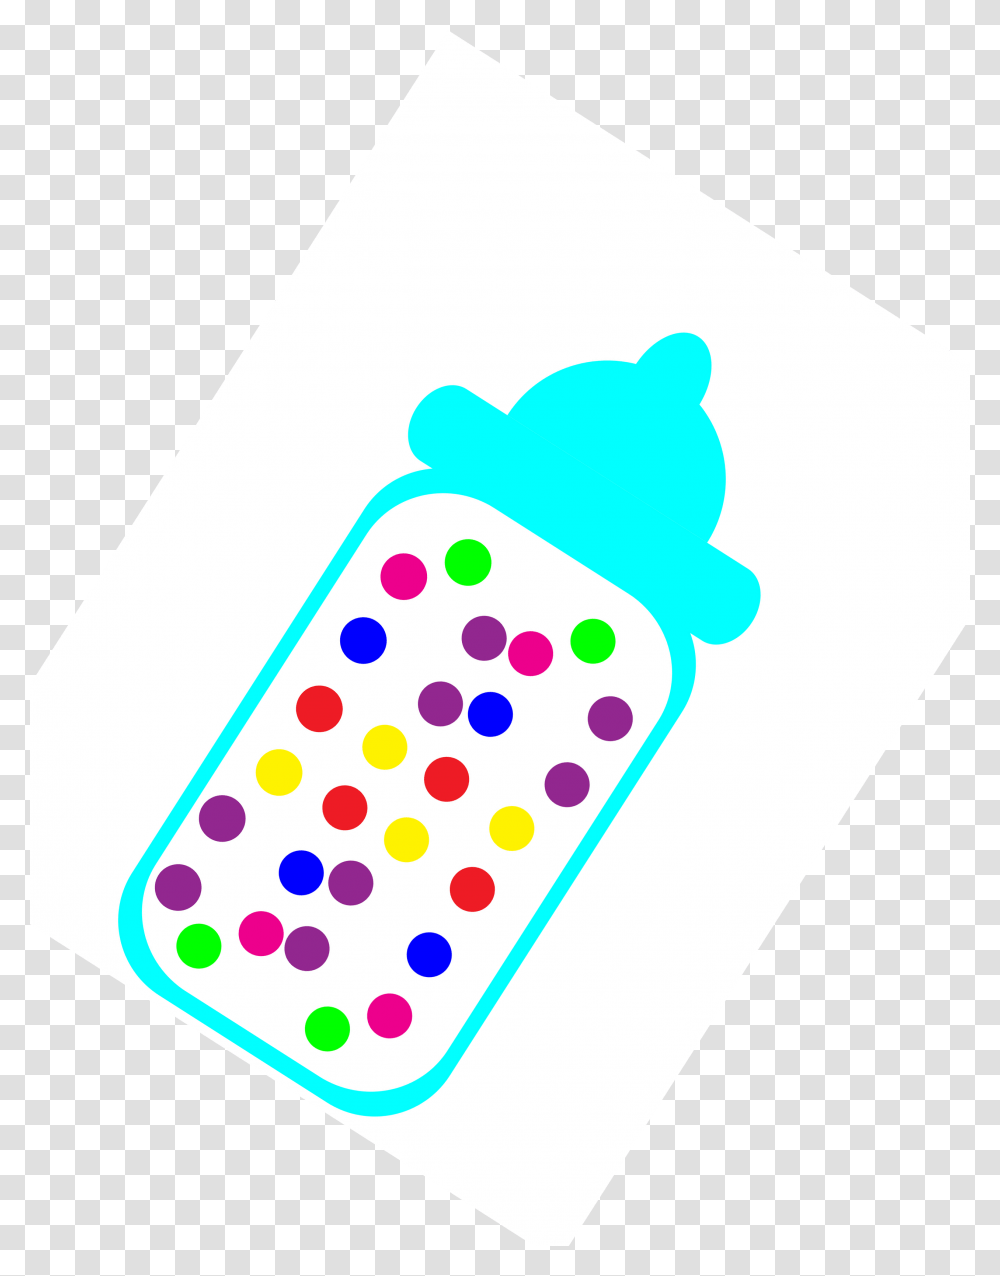 Baby Shower Baby Bottles Jelly Bean Clip Art Candy In A Baby Bottle Clipart, Texture, Polka Dot, Pencil Box Transparent Png